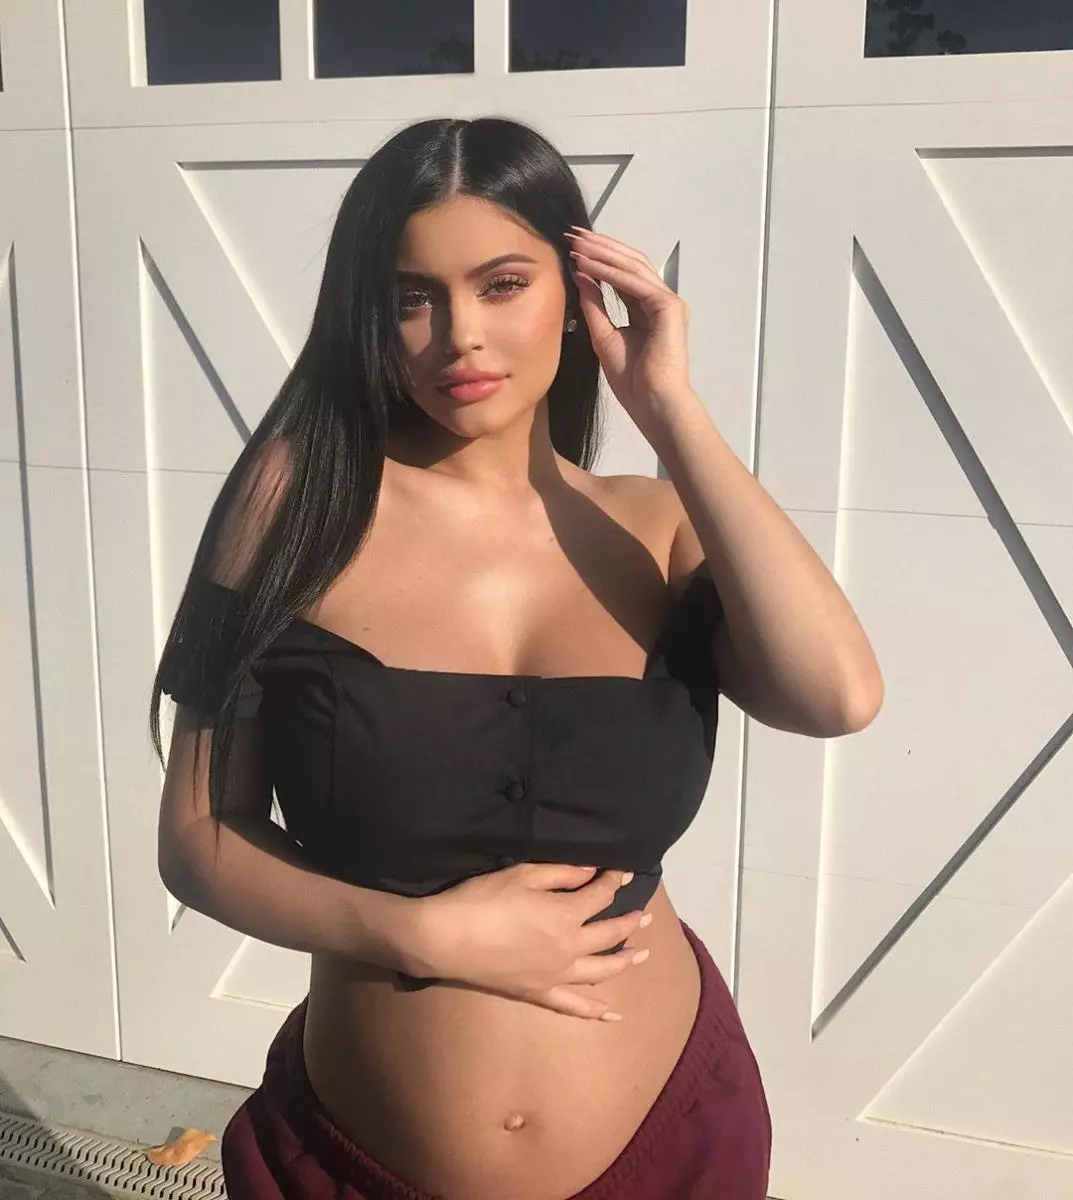 Kylie Jenner told how pregnancy prepared her to self-insulation 93895_1